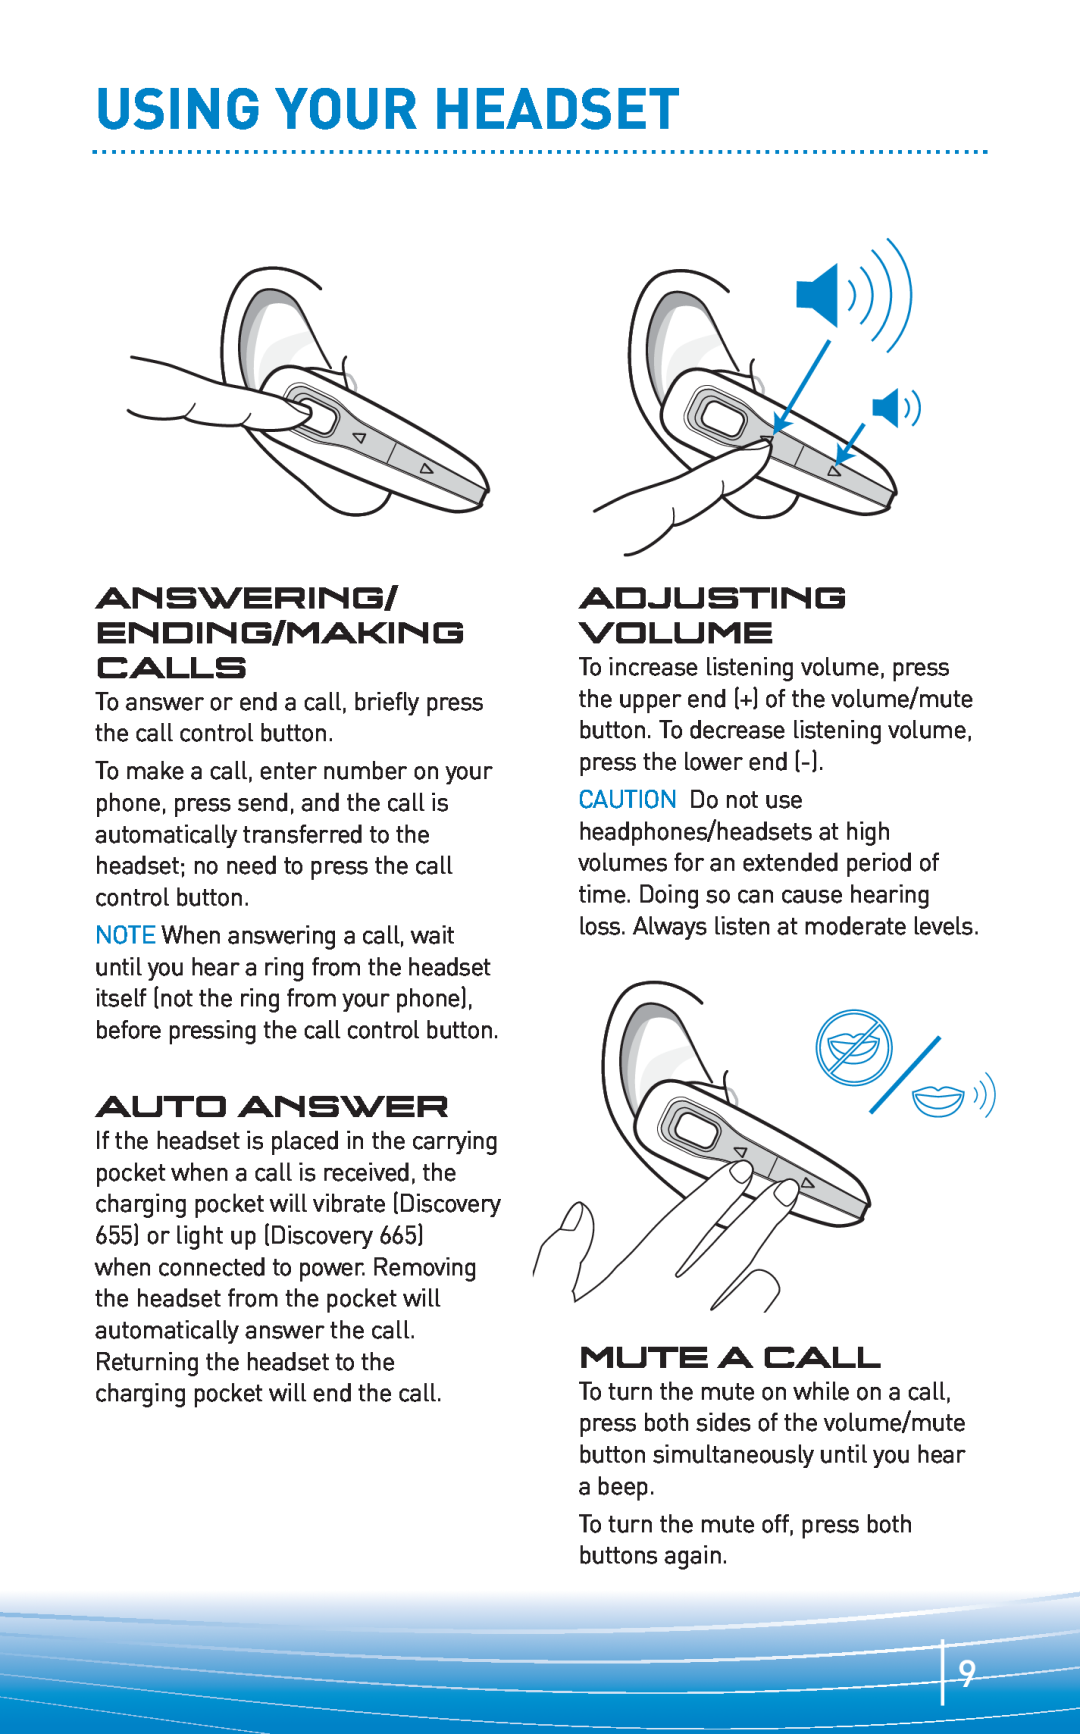 Plantronics 665 manual Using Your Headset, Answering Ending/Making Calls, Auto Answer, Adjusting Volume, Muteacall 